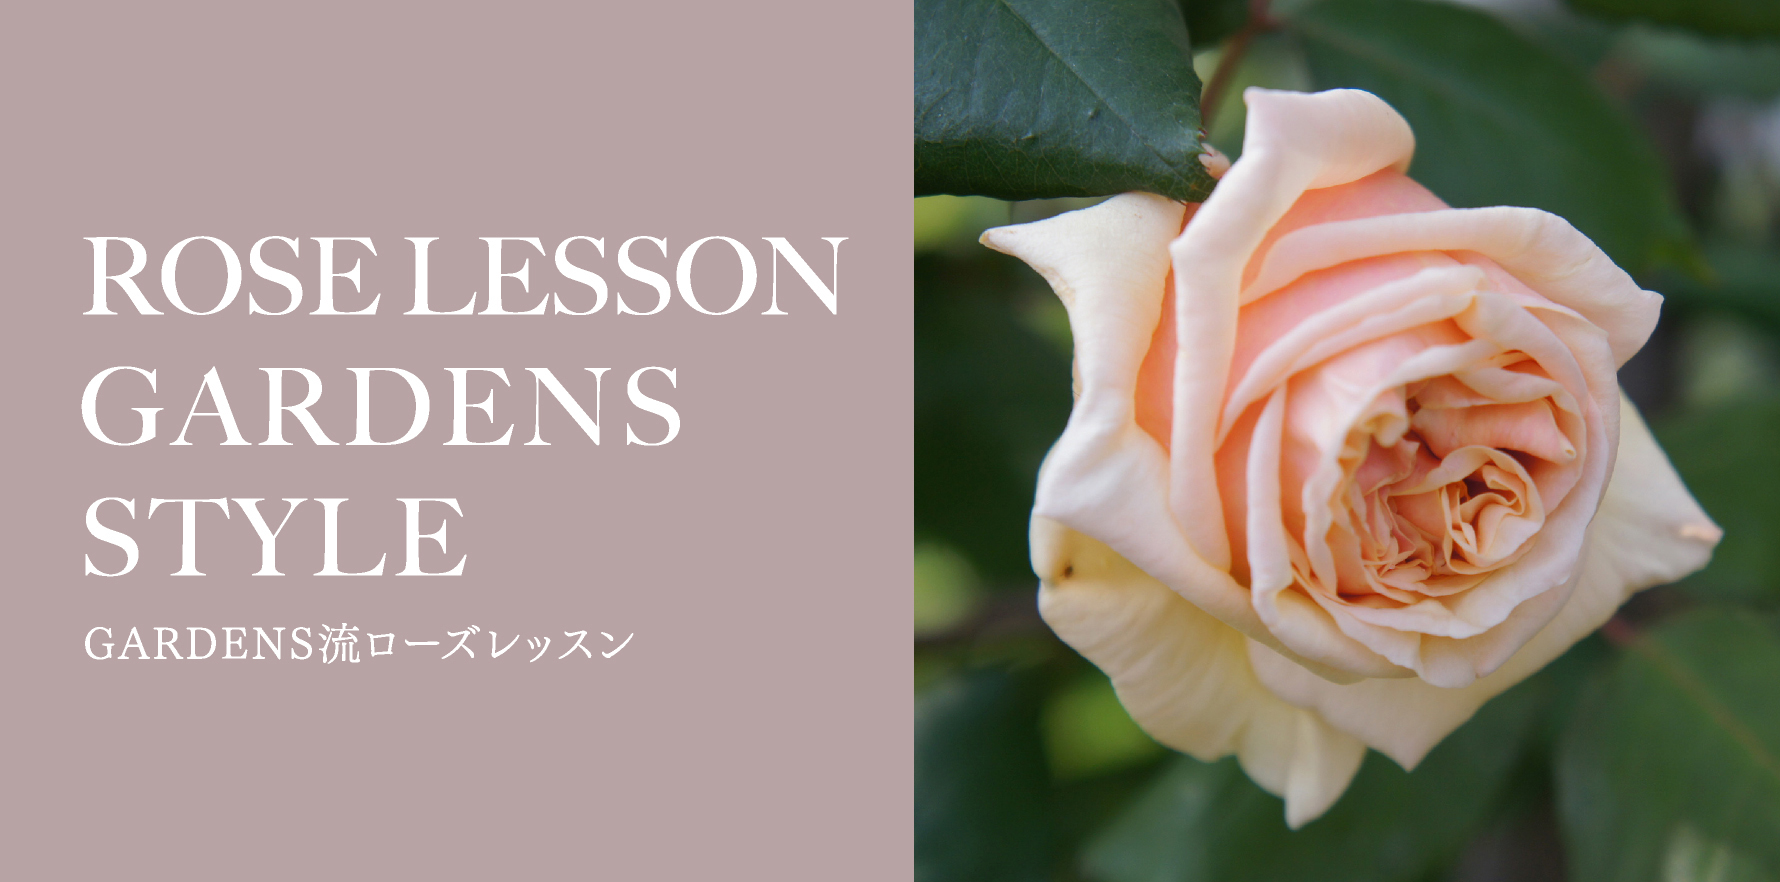 ROSE LESSON in GARDENS STYLE ガーデンズ流ローズレッスン